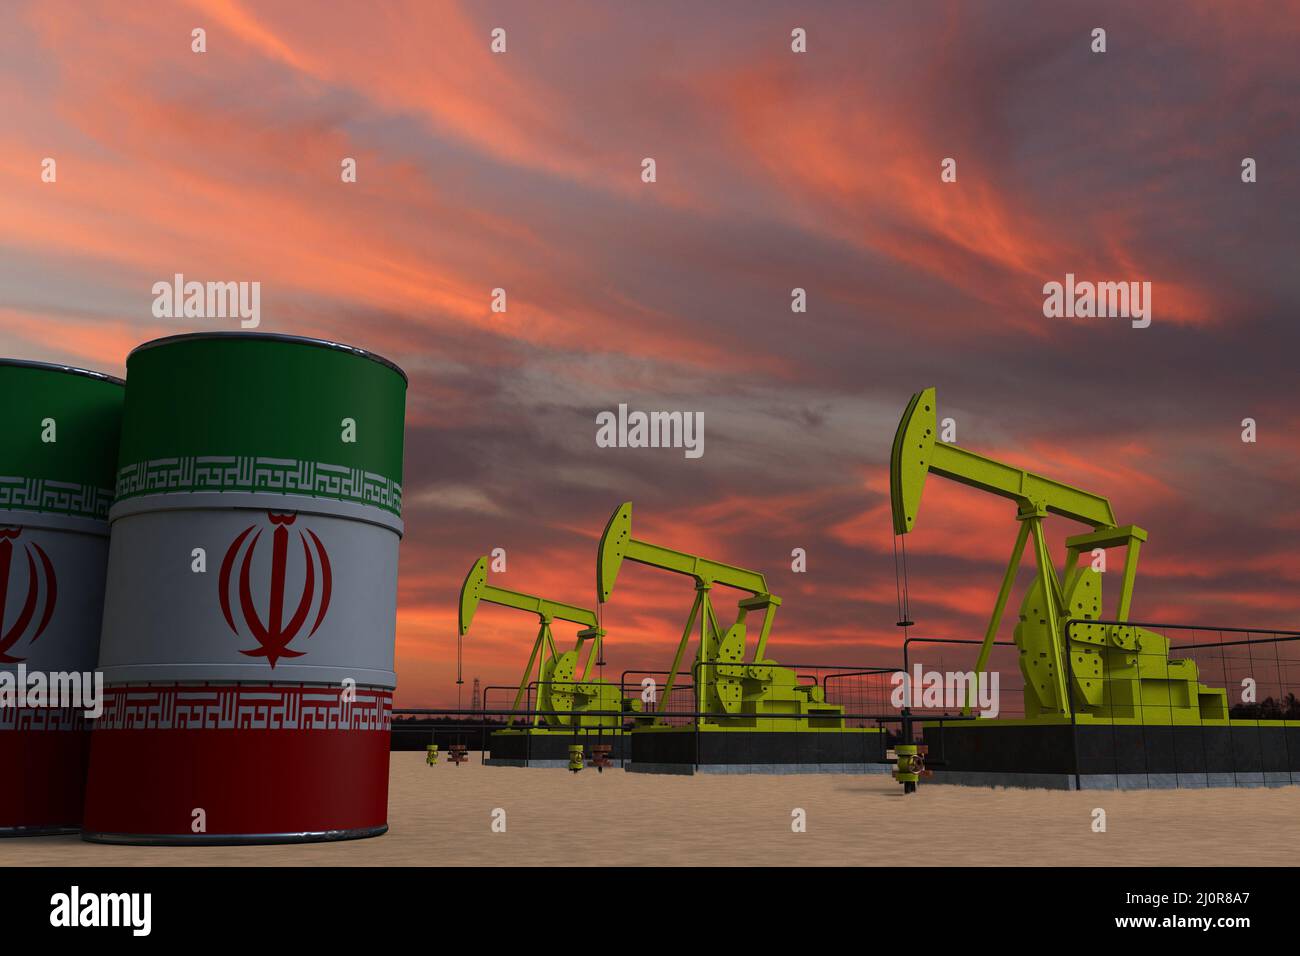 Nice pumpjack oil extraction and cloudy sky in sunset with the IRAN flag on oil barrels 3D rendering Stock Photo